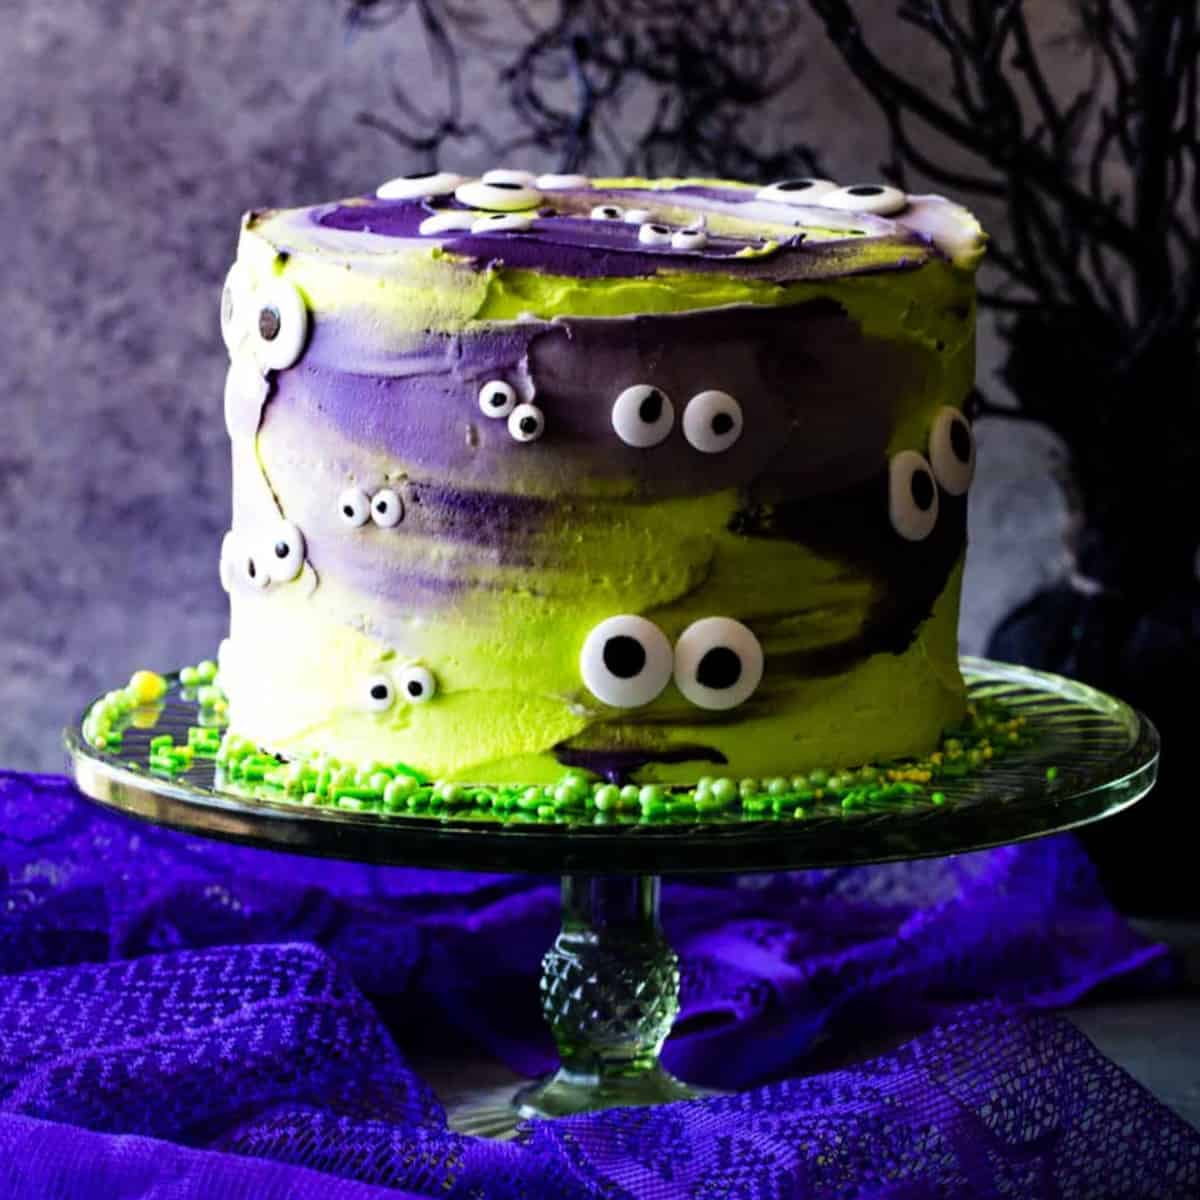 The Bake More: Glow In The Dark Cake